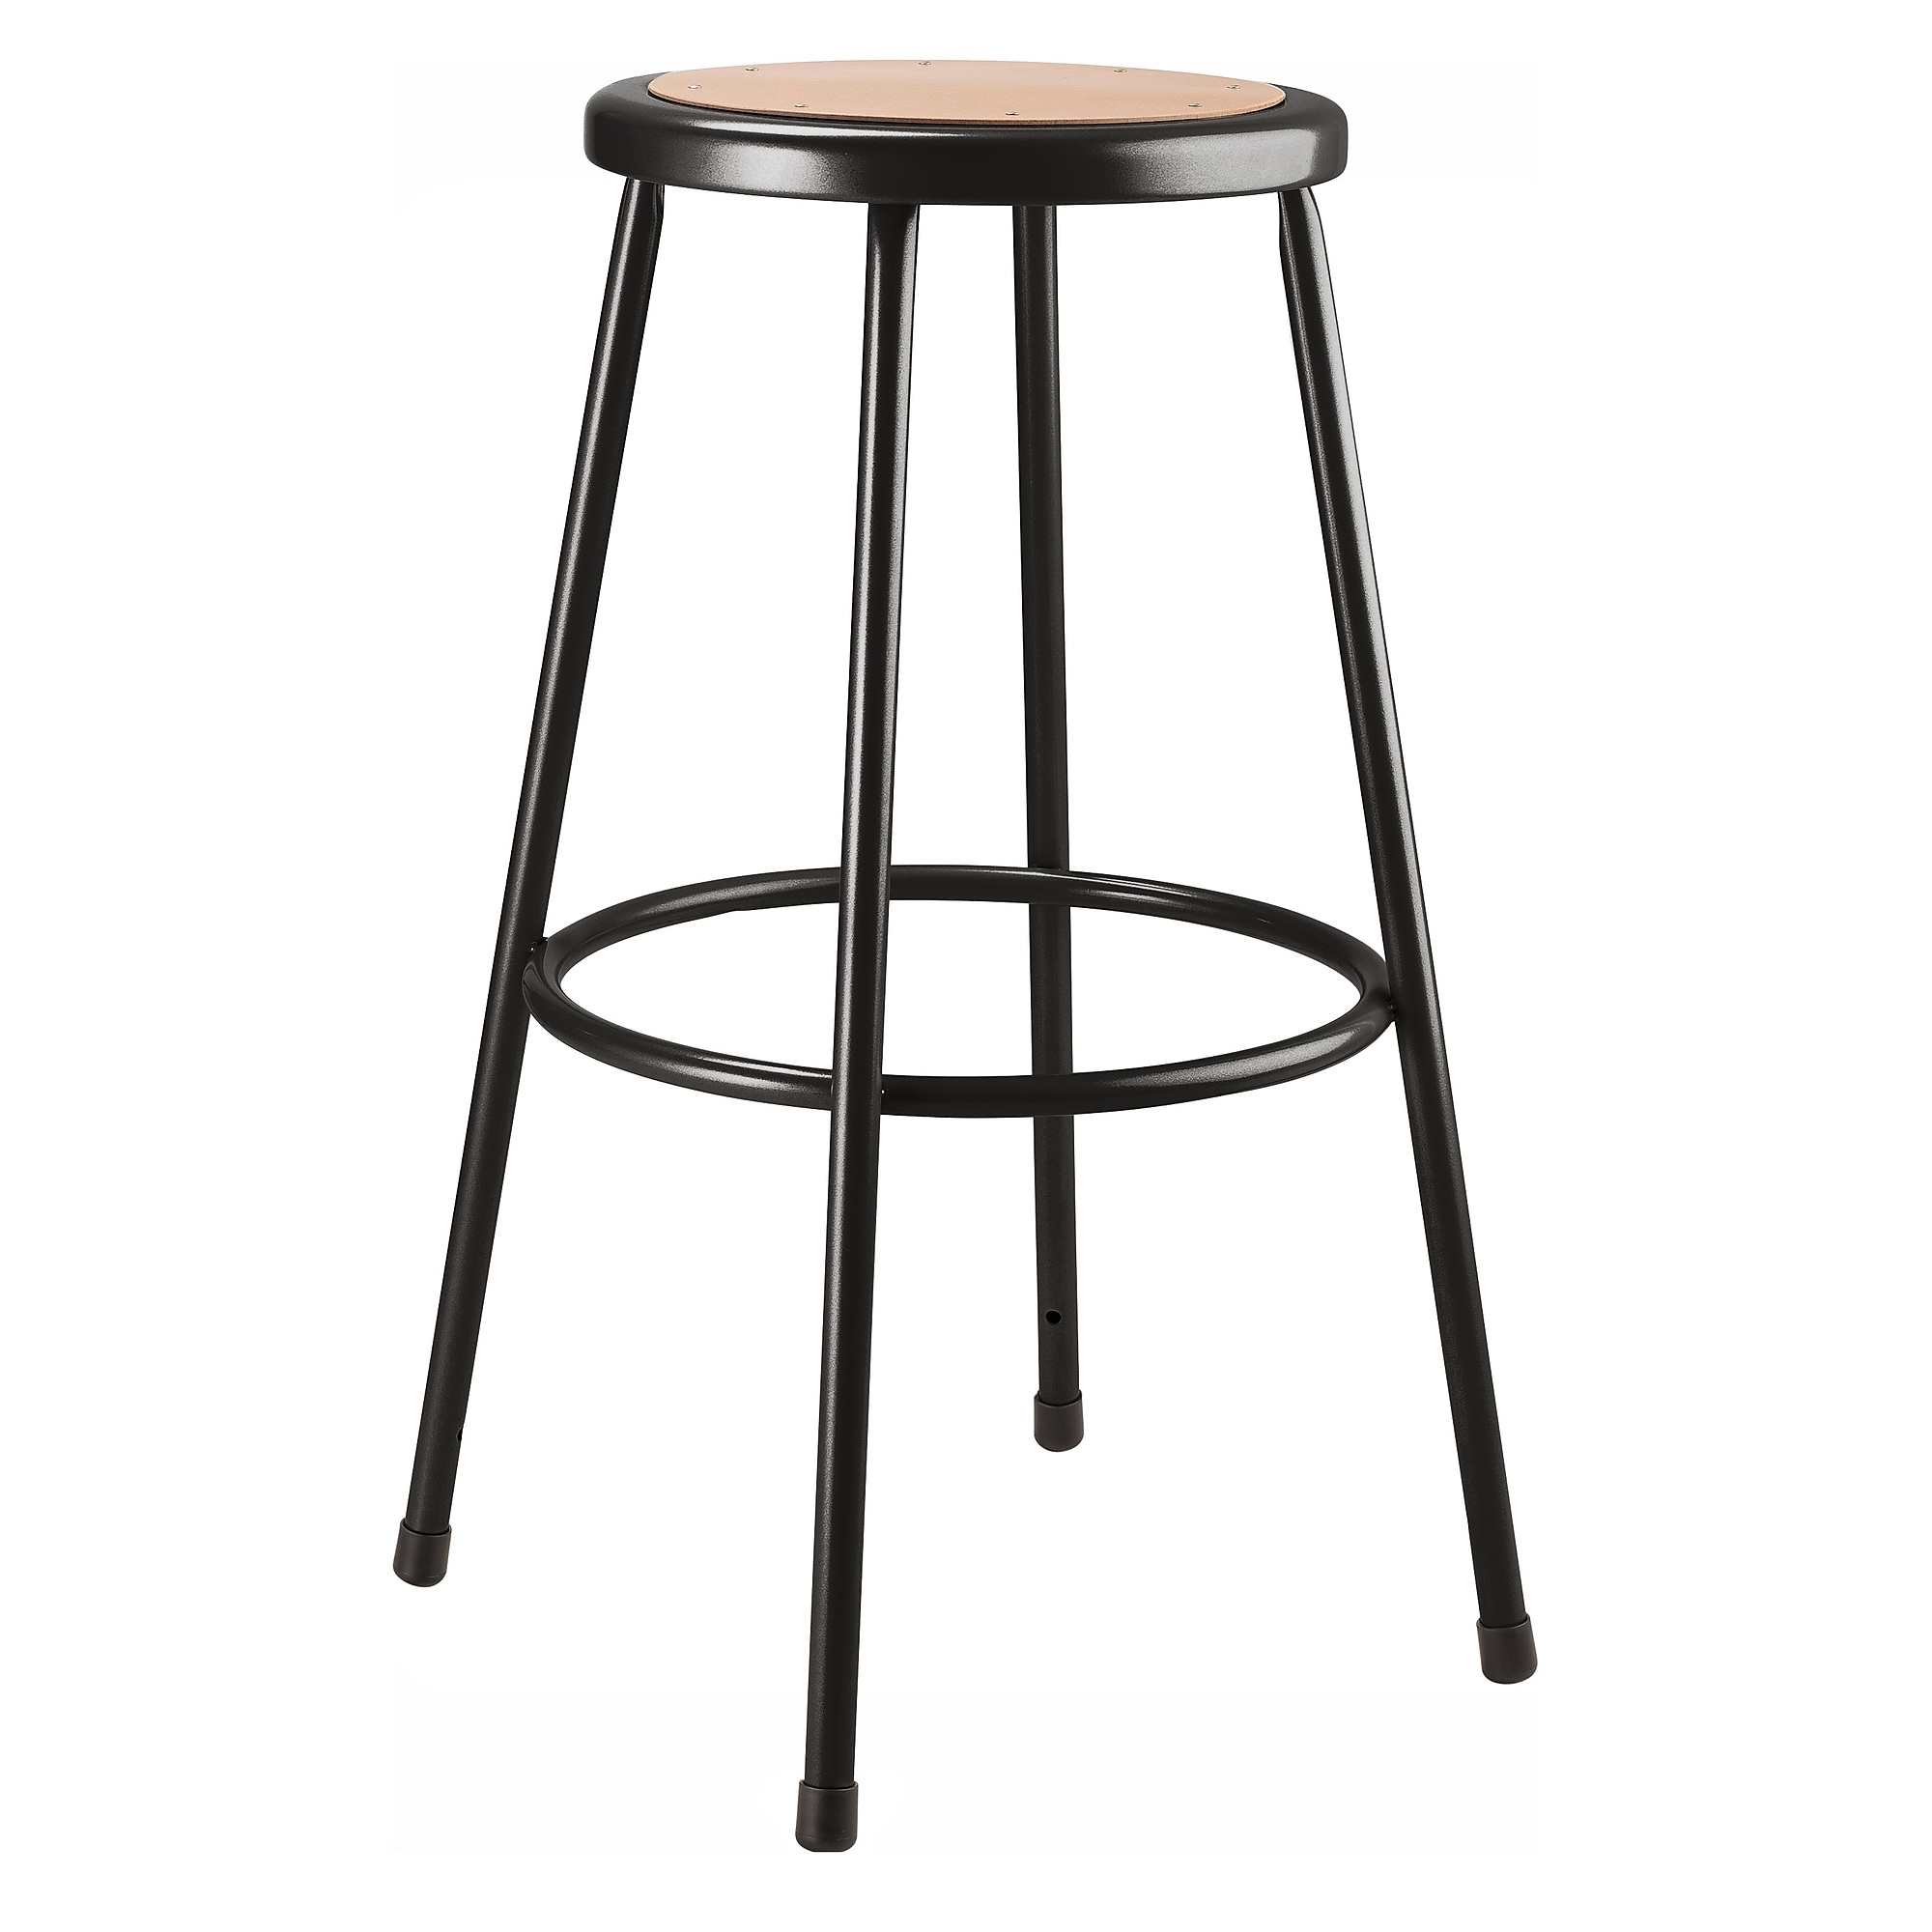 National Public Seating, 30Inch Heavy Duty Steel Stool, Black, Primary Color Black, Included (qty.) 1, Seating Type Office Stool, Model 6230-10